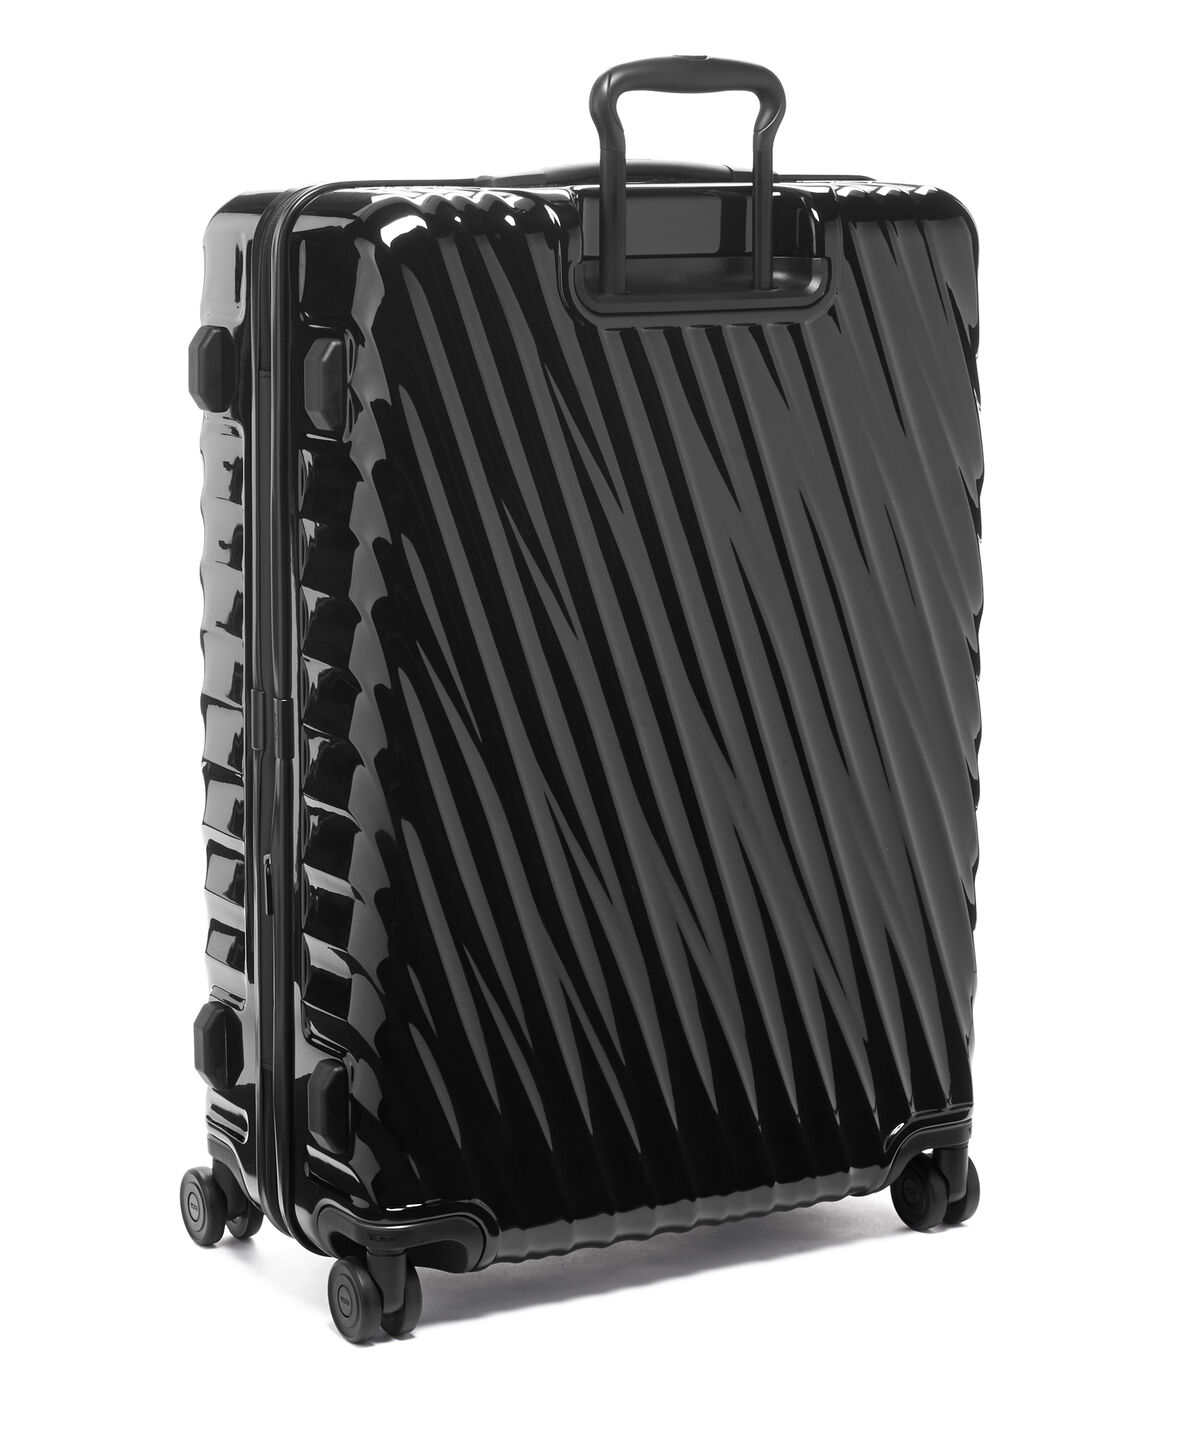 19 Degree Valise extensible Extended Trip 77,5 cm | TUMI France